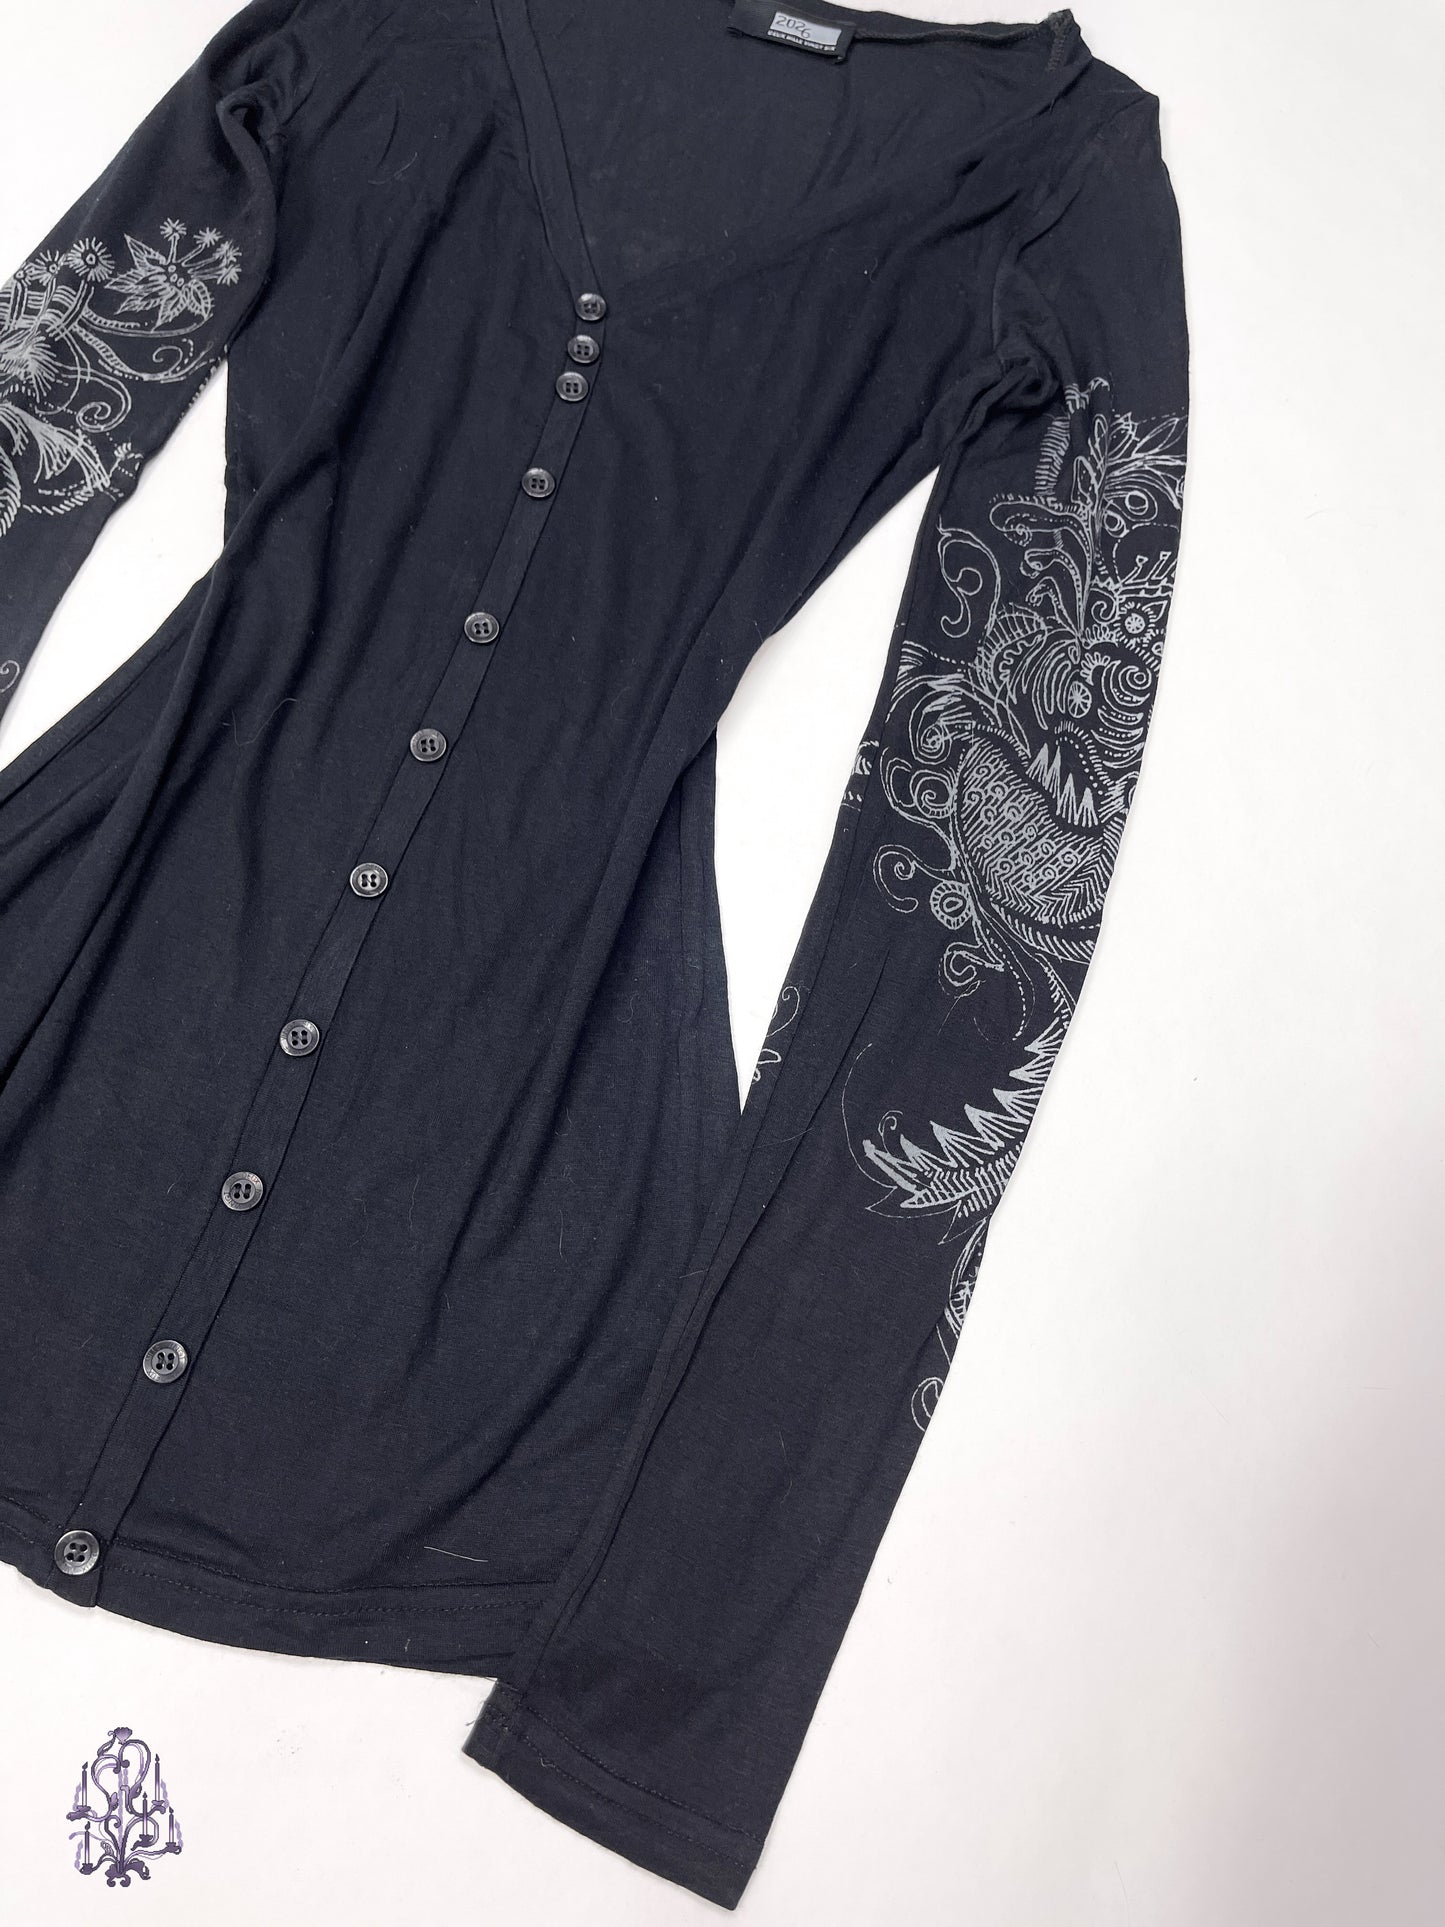 2026 tattoo long sleeves button up top